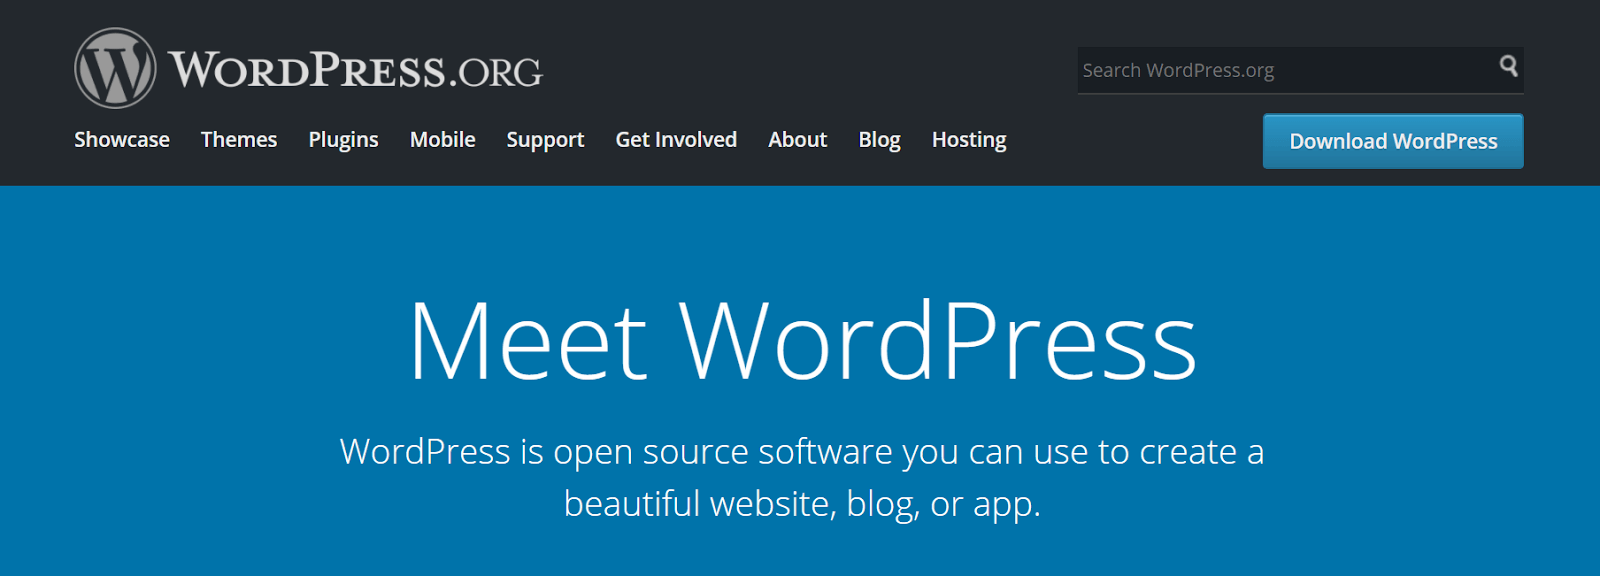 wordpress-home-page.PNG